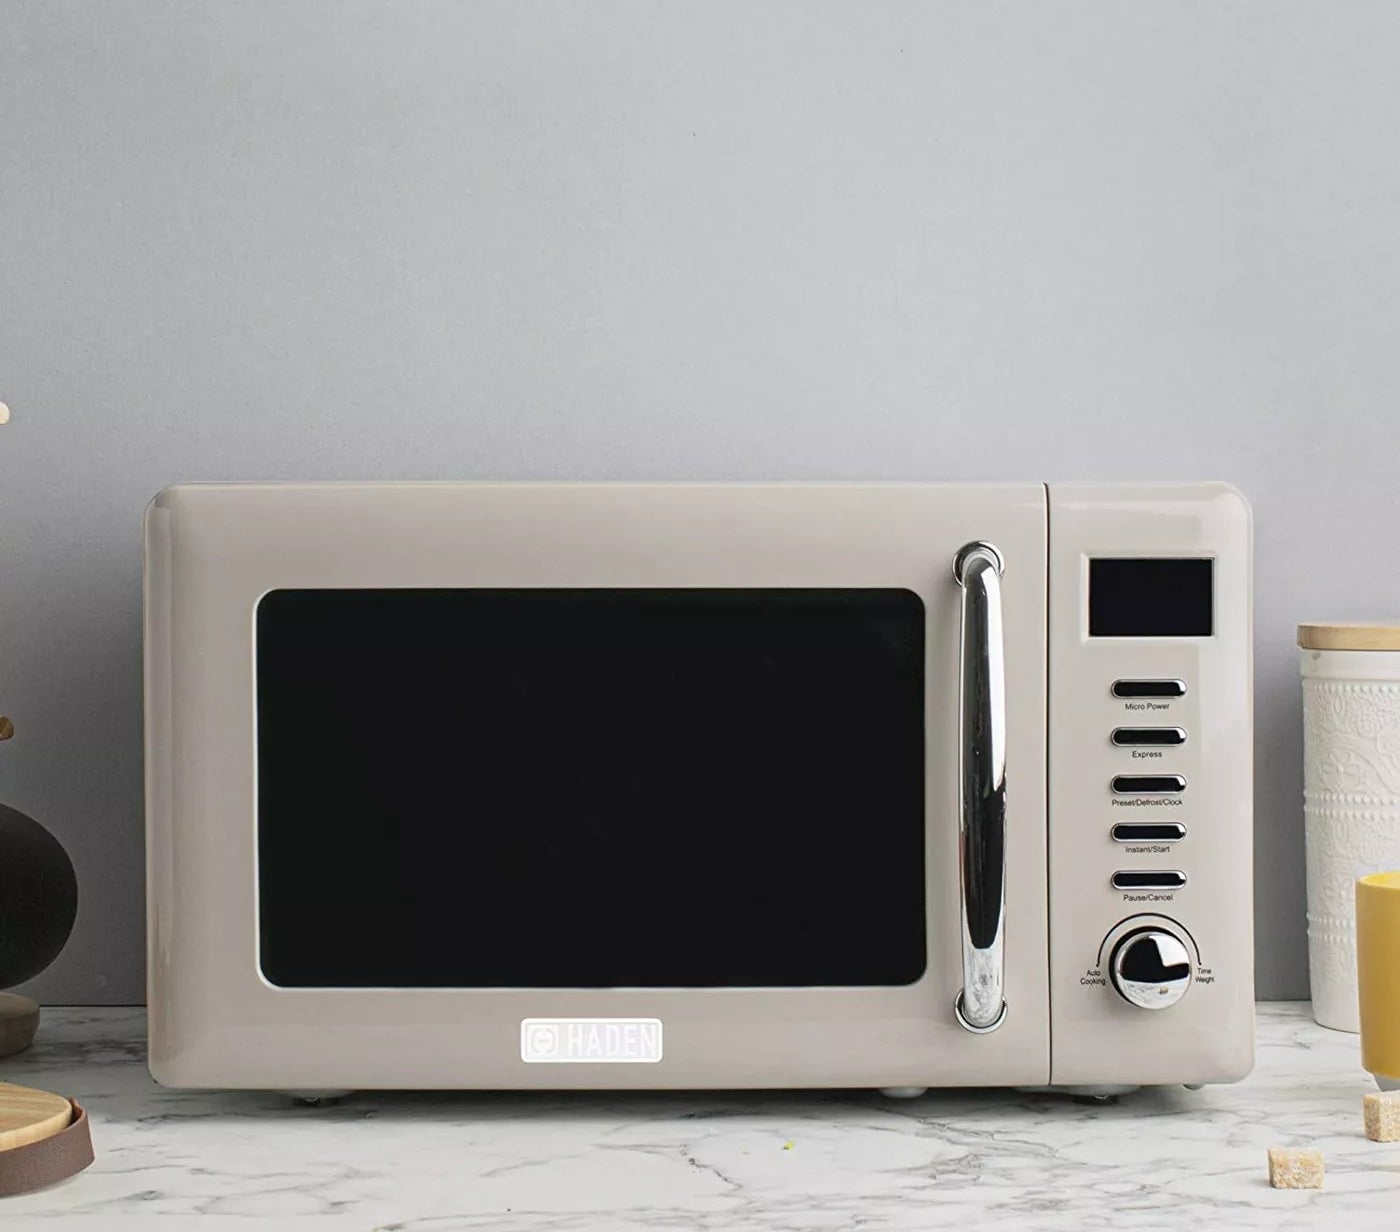 The microwave sitting on a marble countertop